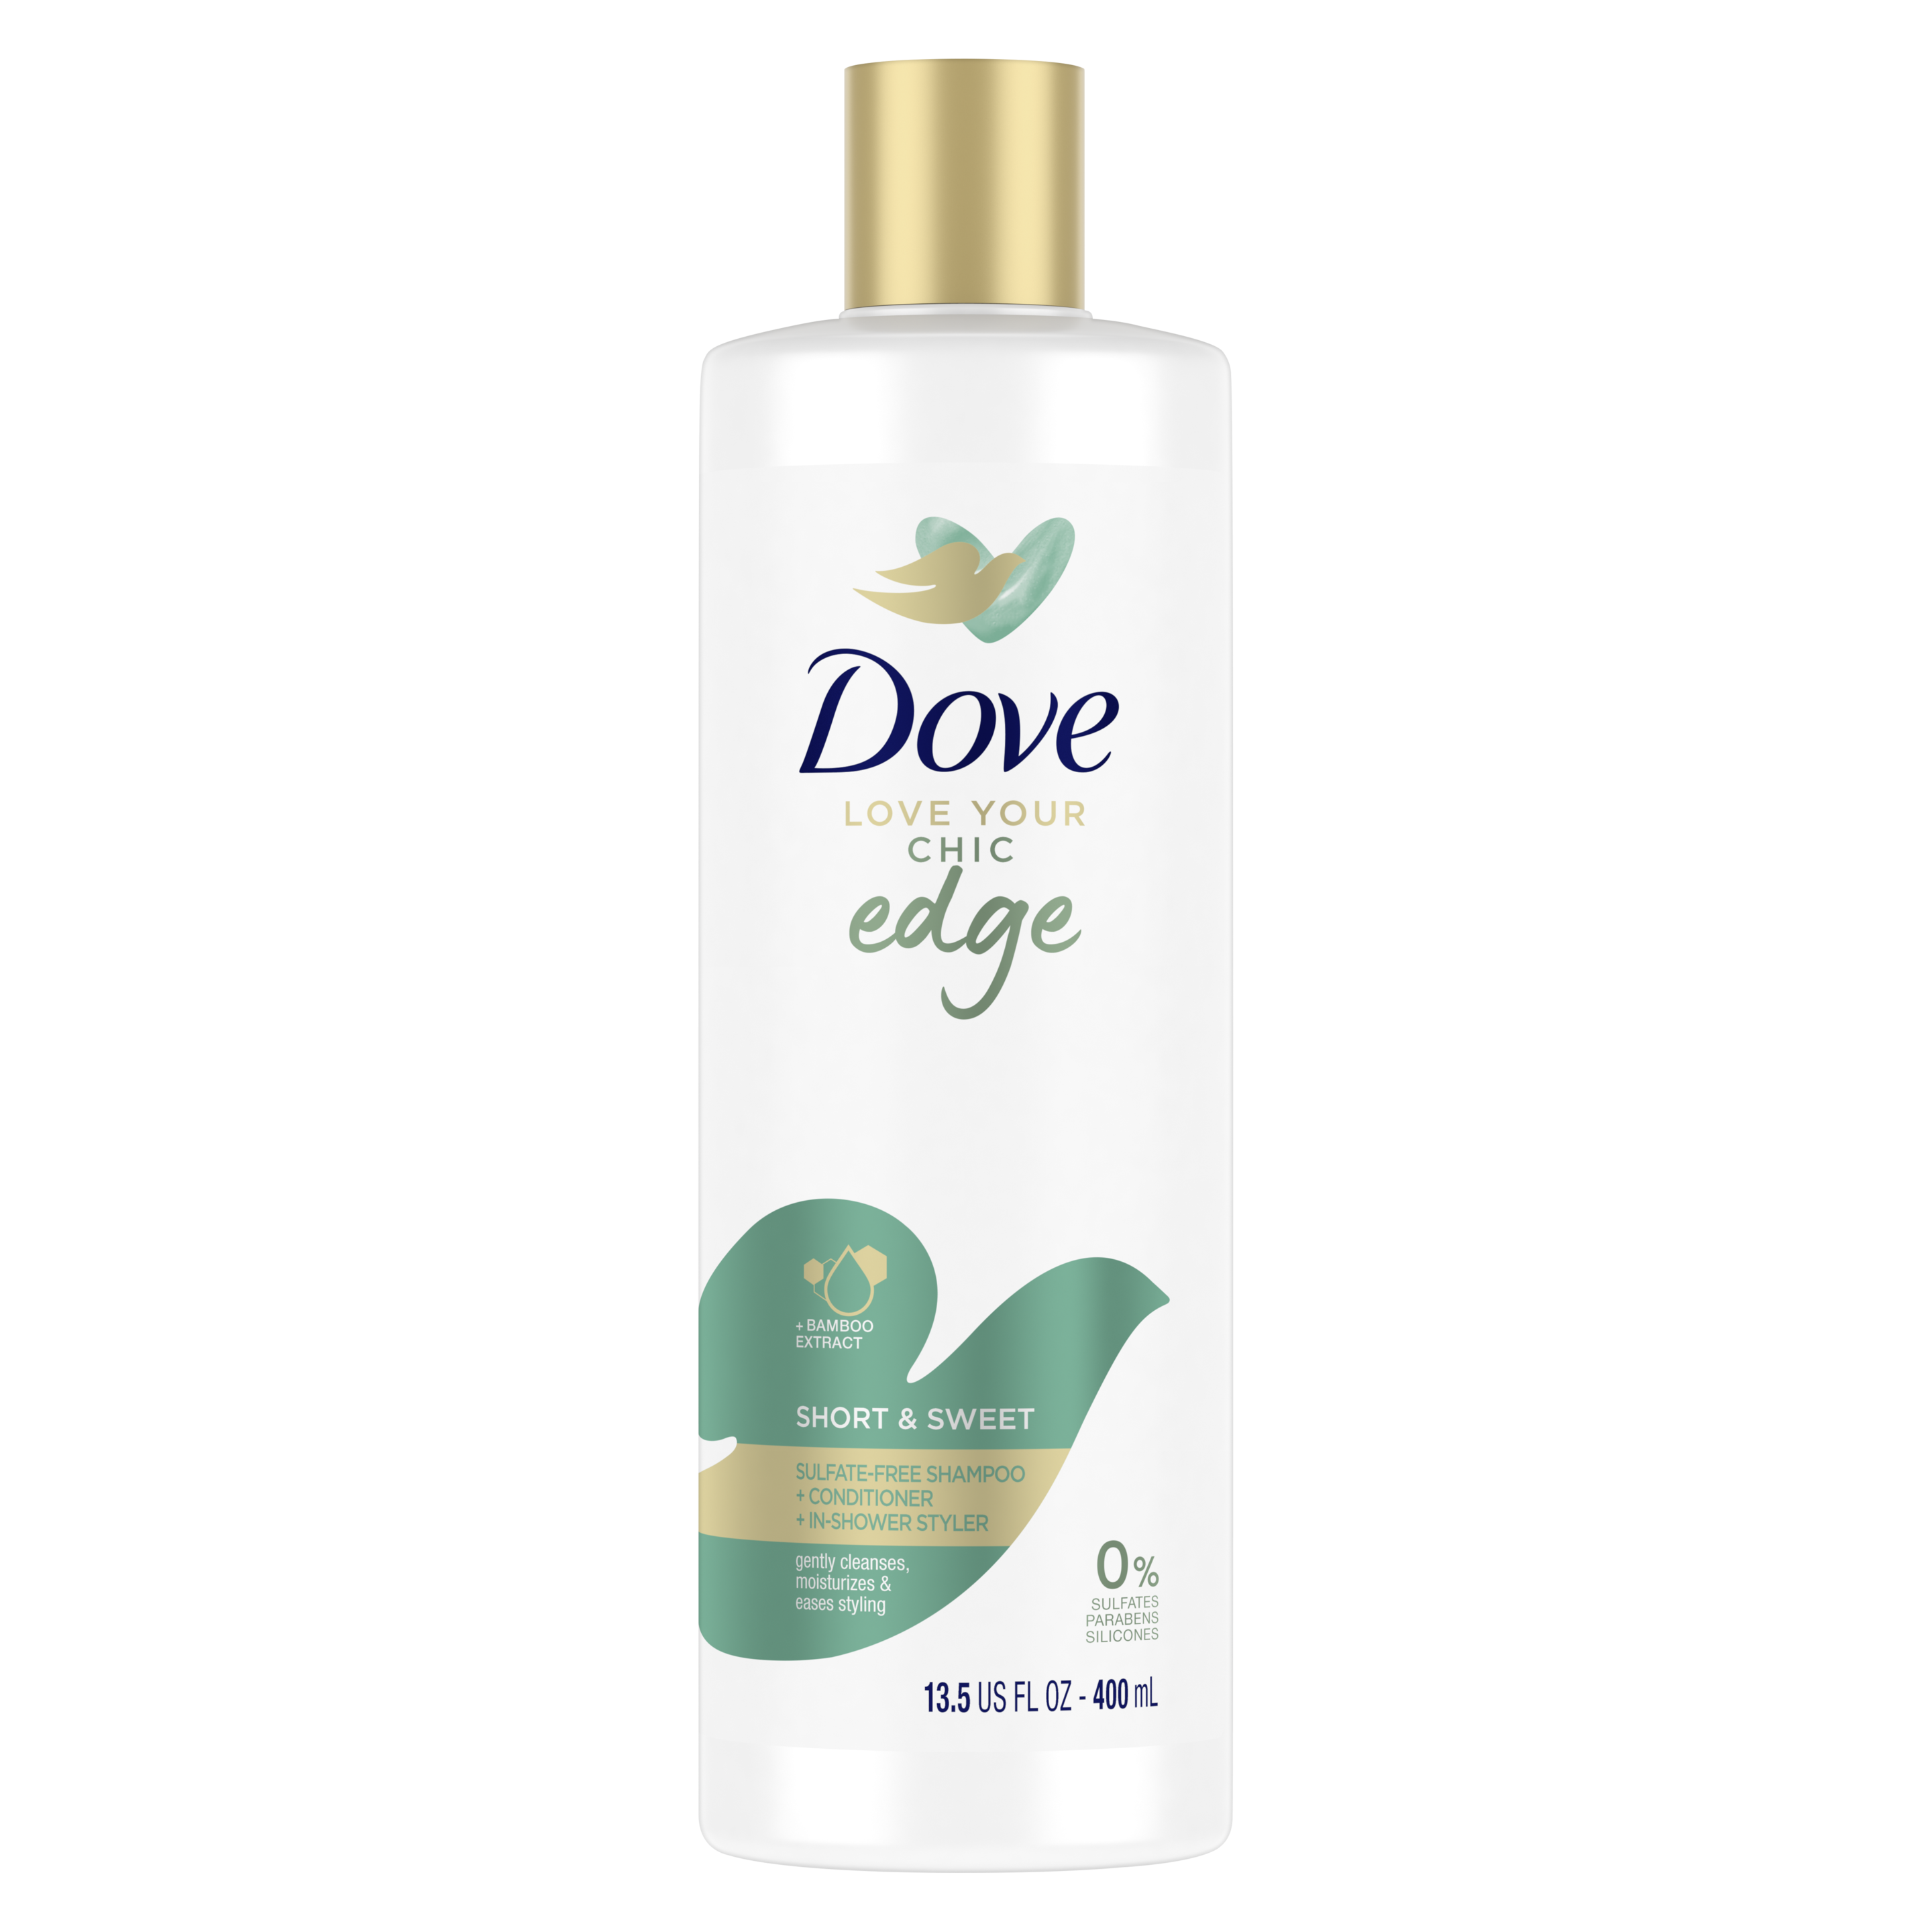 Dove Love Your Chic Edge Short and Sweet Sulfate-Free Shampoo + Conditioner + In-Shower Styler